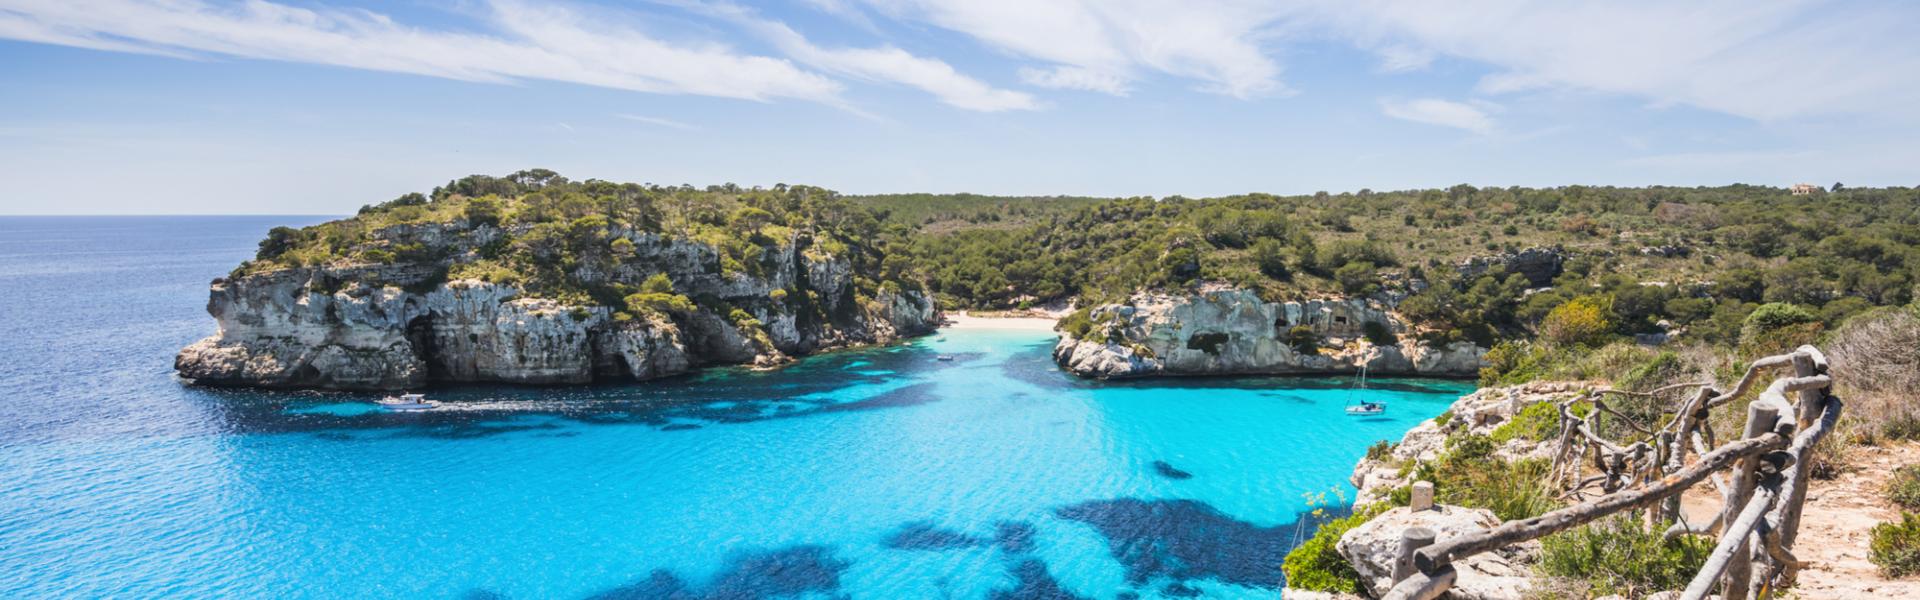 Find the perfect self catering accommodation on Menorca - Casamundo